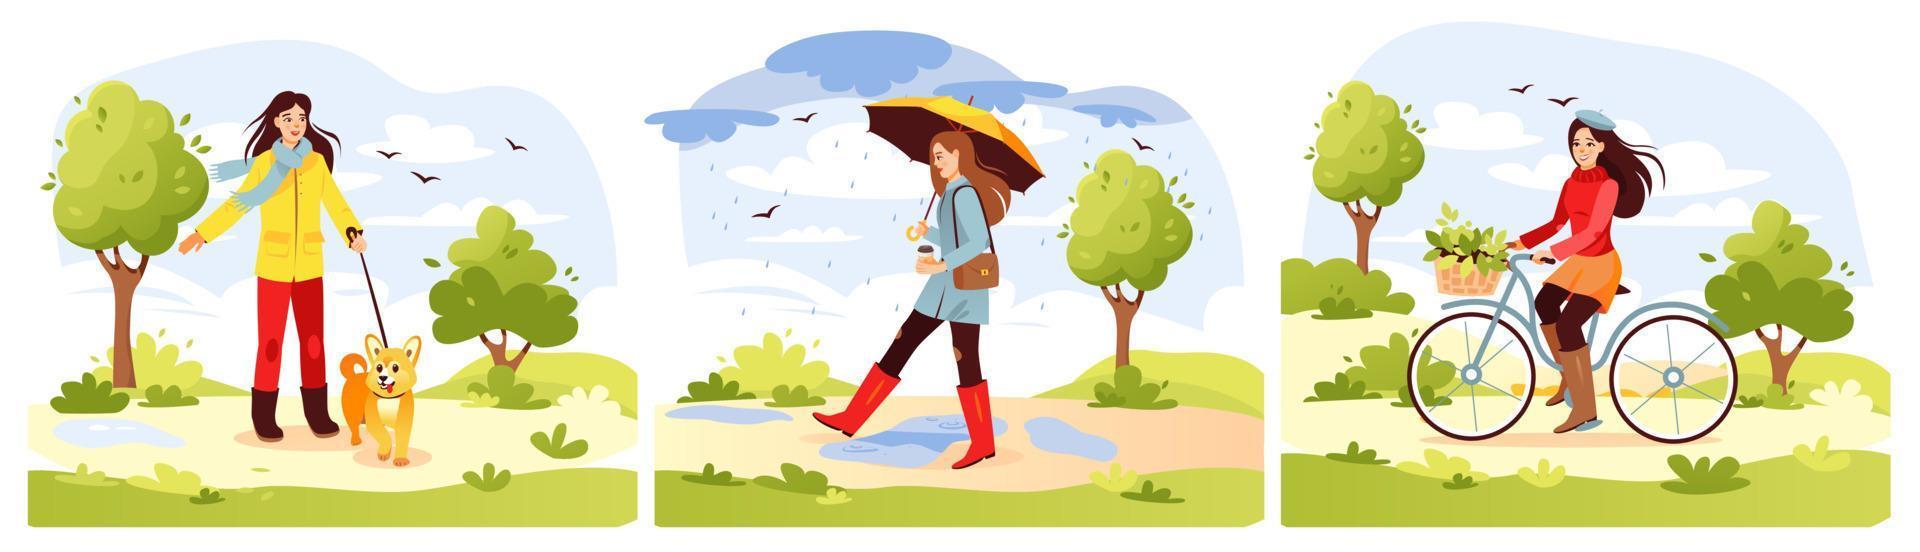 Spring park. Set of young girls walking in the park in spring. The girl drinks coffee, walks the dog, rides a bike. cartoon vector illustration